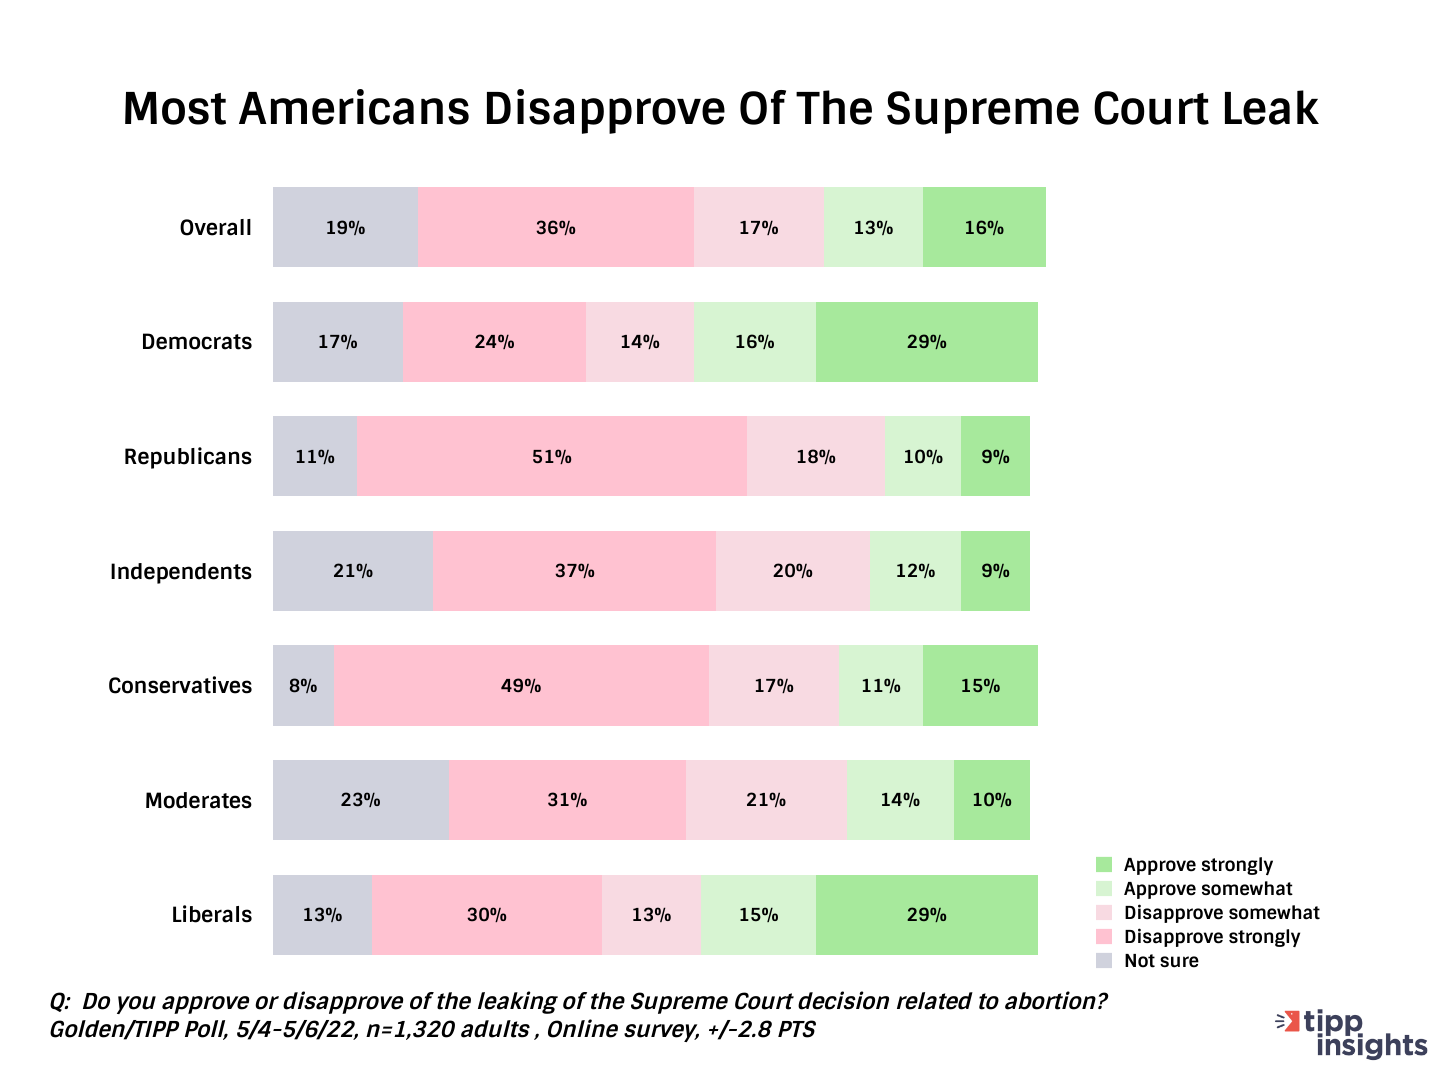 Most Americans Disapprove of the Supreme Court Leak